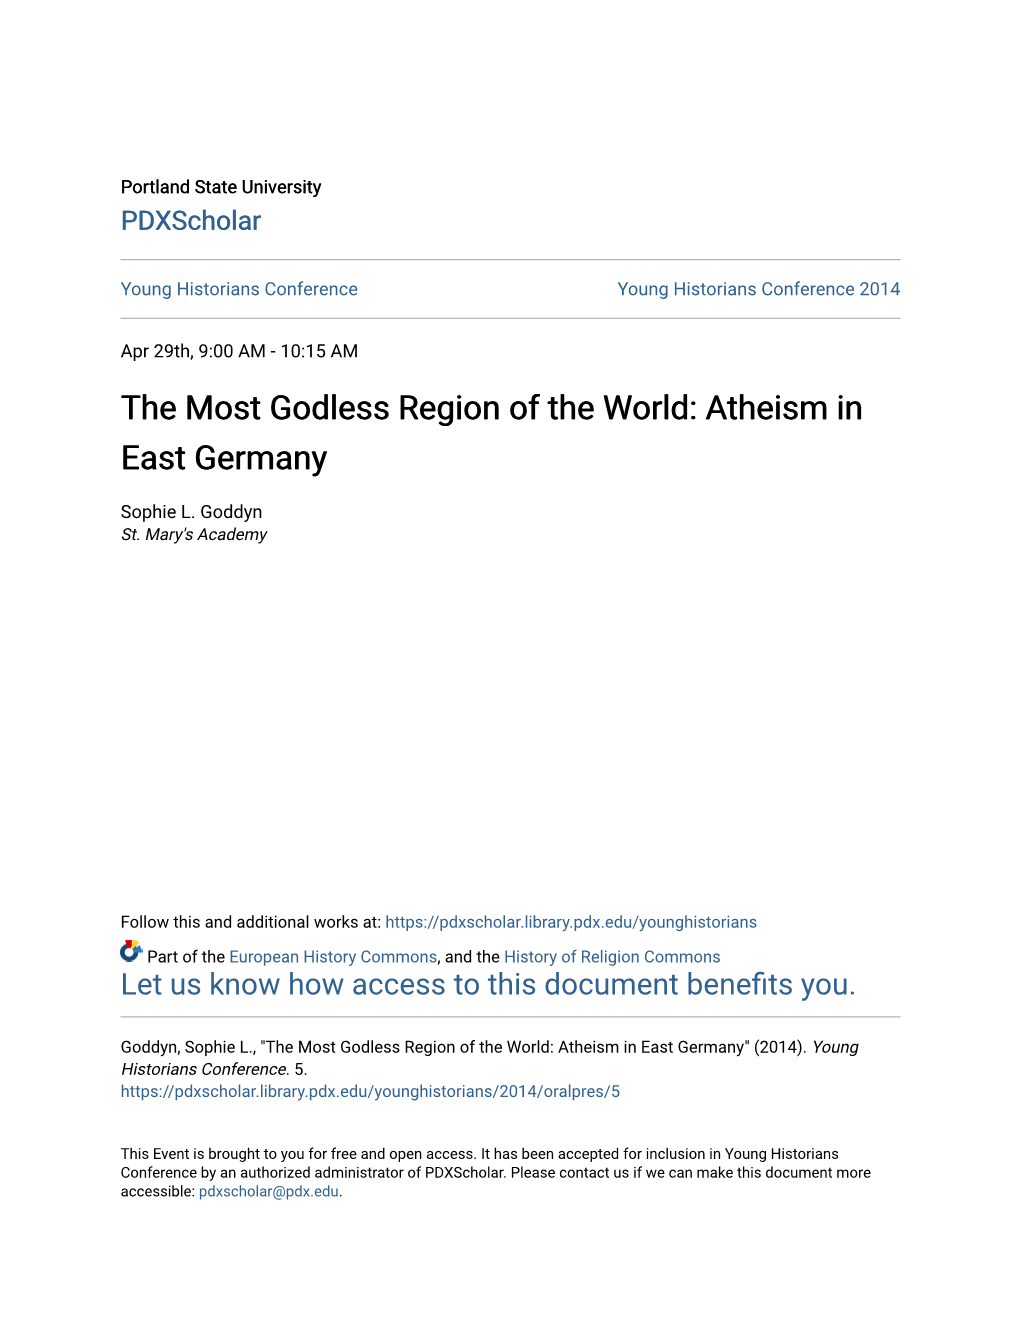 The Most Godless Region of the World: Atheism in East Germany